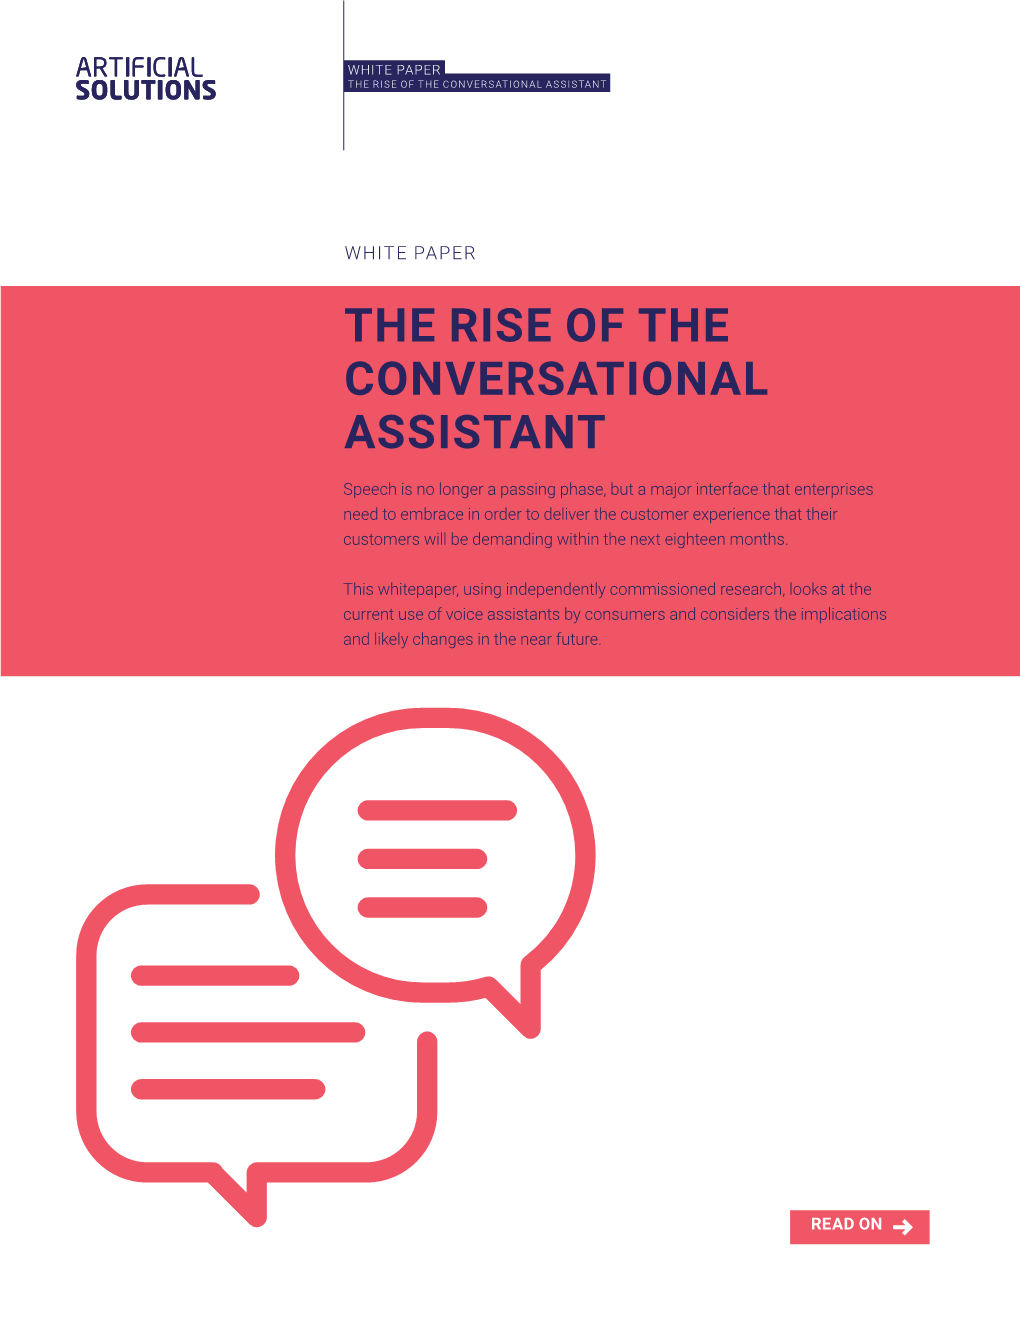 The Rise of the Conversational Assistant